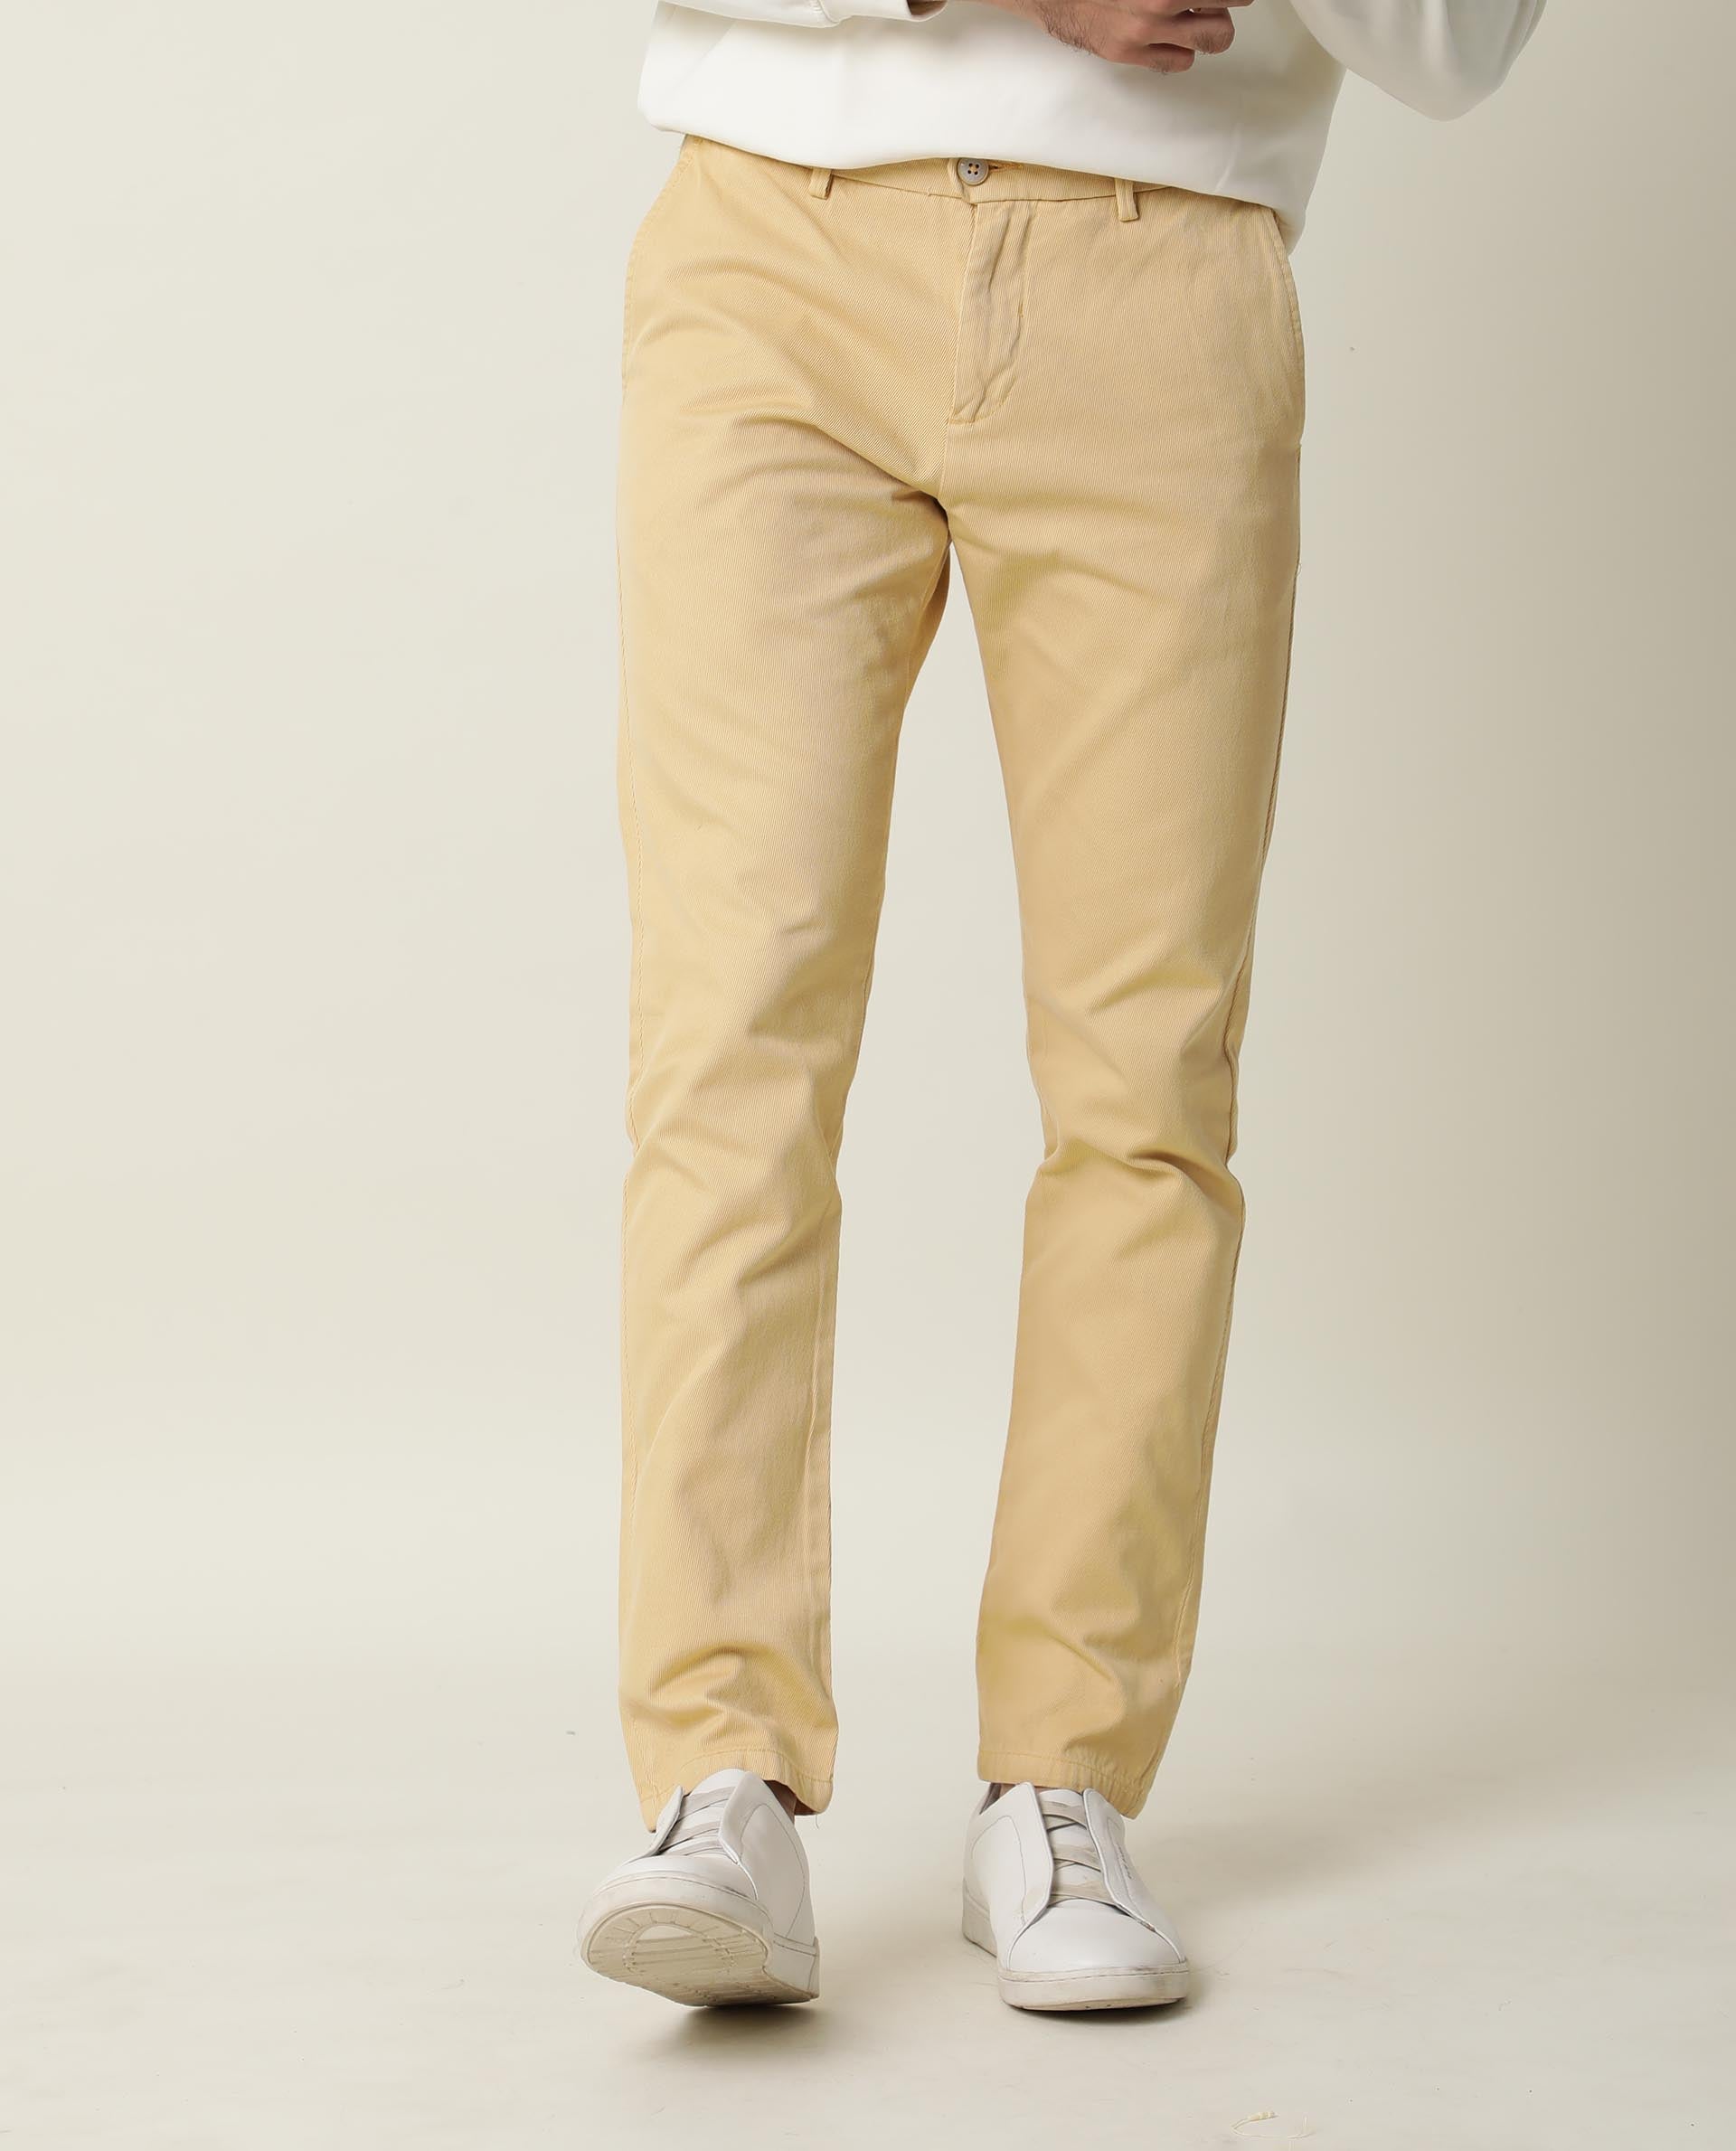 Levis Chinos  Buy Levis Men Cream 550 Relaxed Tapered Fit Chinos Online   Nykaa Fashion